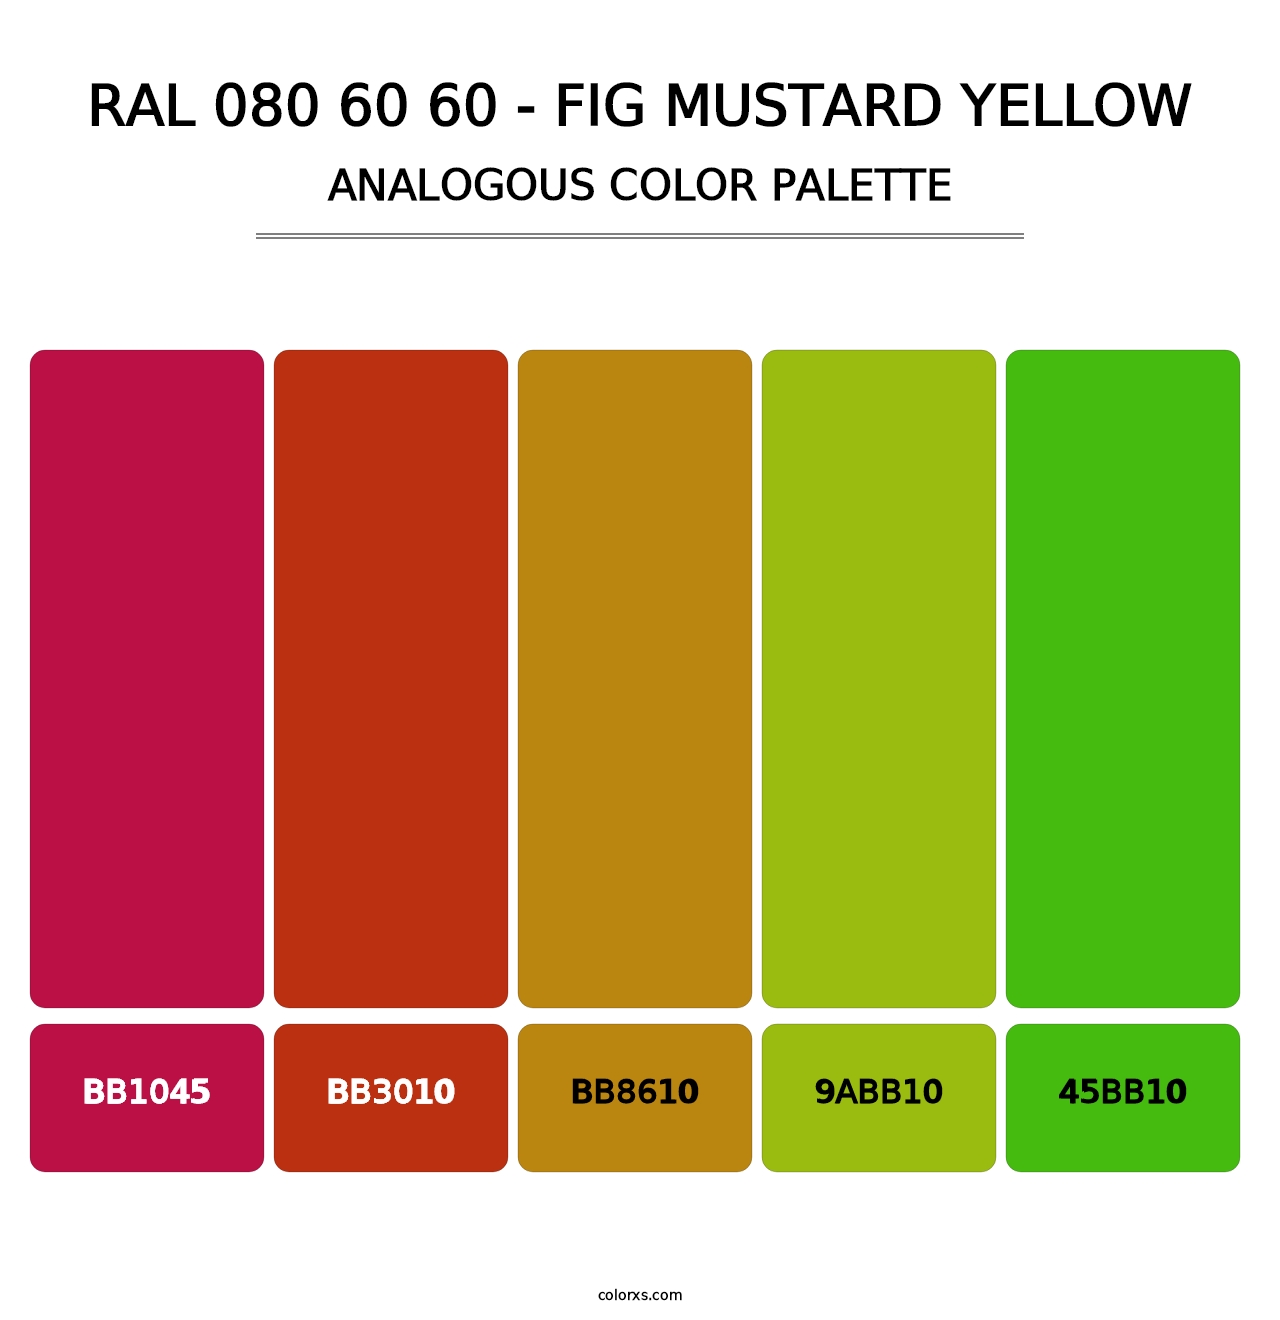 RAL 080 60 60 - Fig Mustard Yellow - Analogous Color Palette